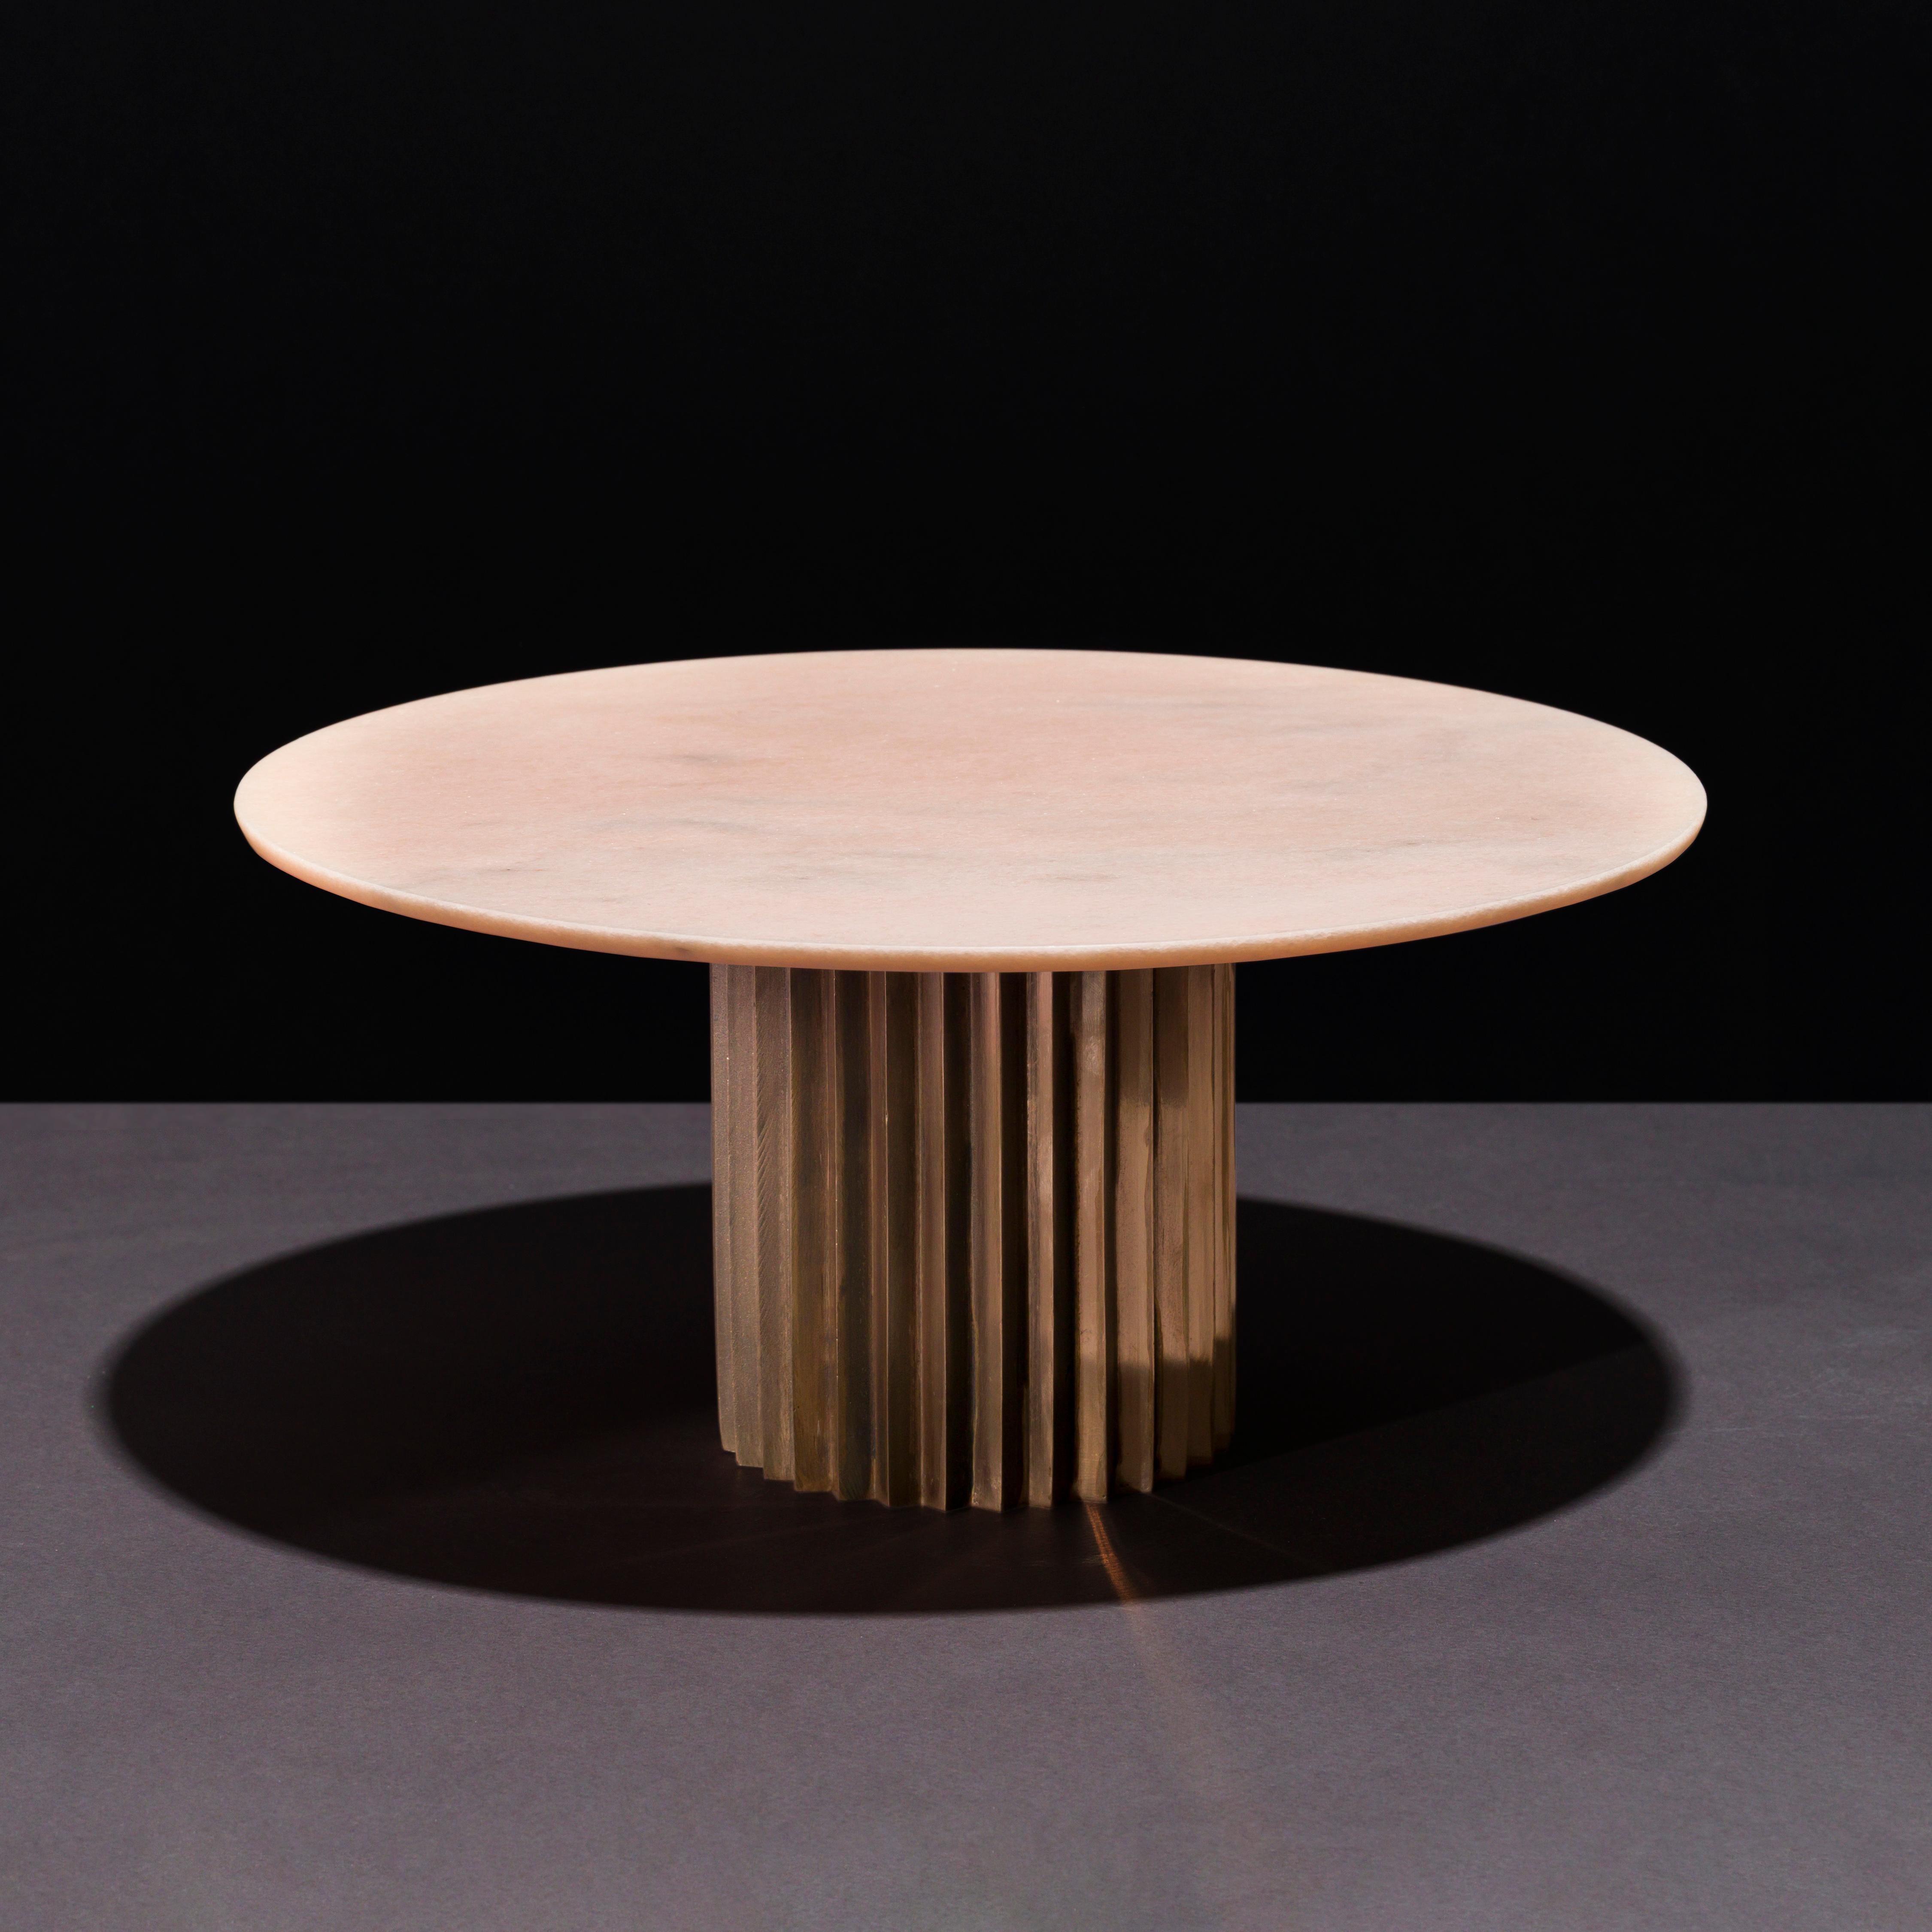 Doris Pink Portugal Marble Dining Table by Fred and Juul
Dimensions: Ø 160 x H 74 cm.
Materials: Bronze and pink Portugal marble.

Available in round, oval and rectangular shapes. Also available in different materials. Custom sizes, materials or